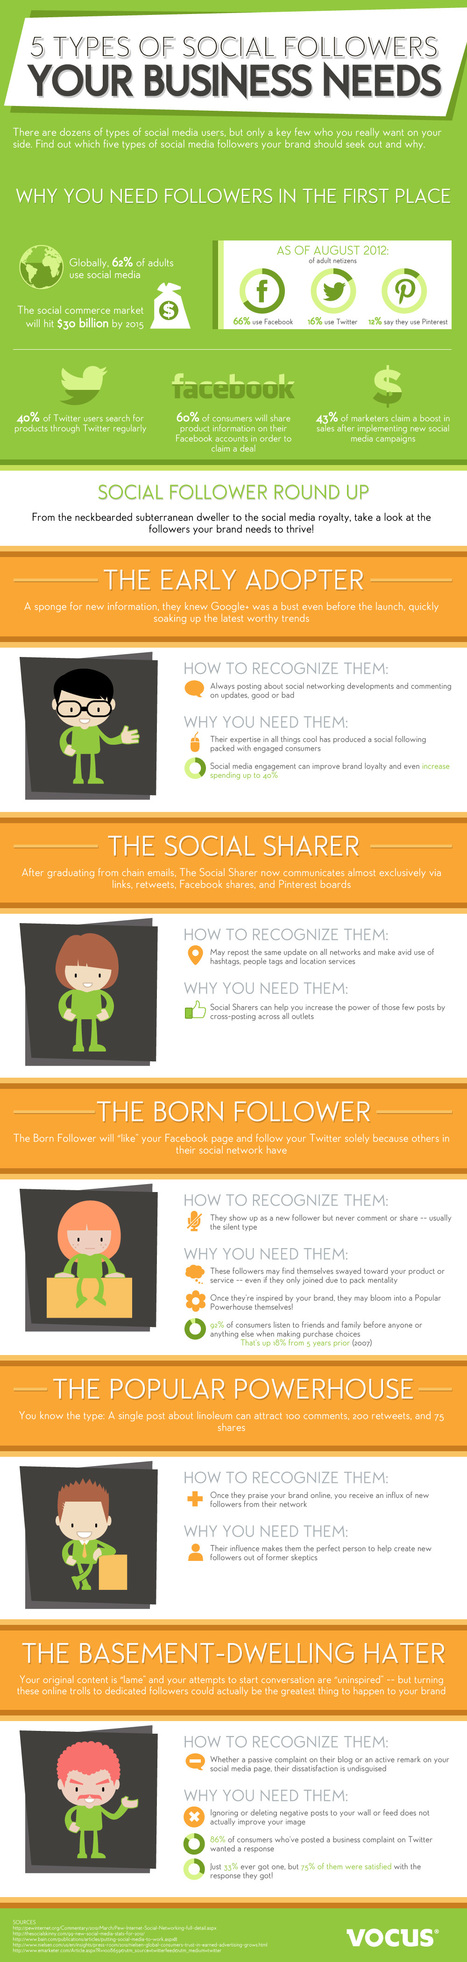 The 5 Types of Social Followers that Every Business Needs [INFOGRAPHIC] | Business Improvement and Social media | Scoop.it